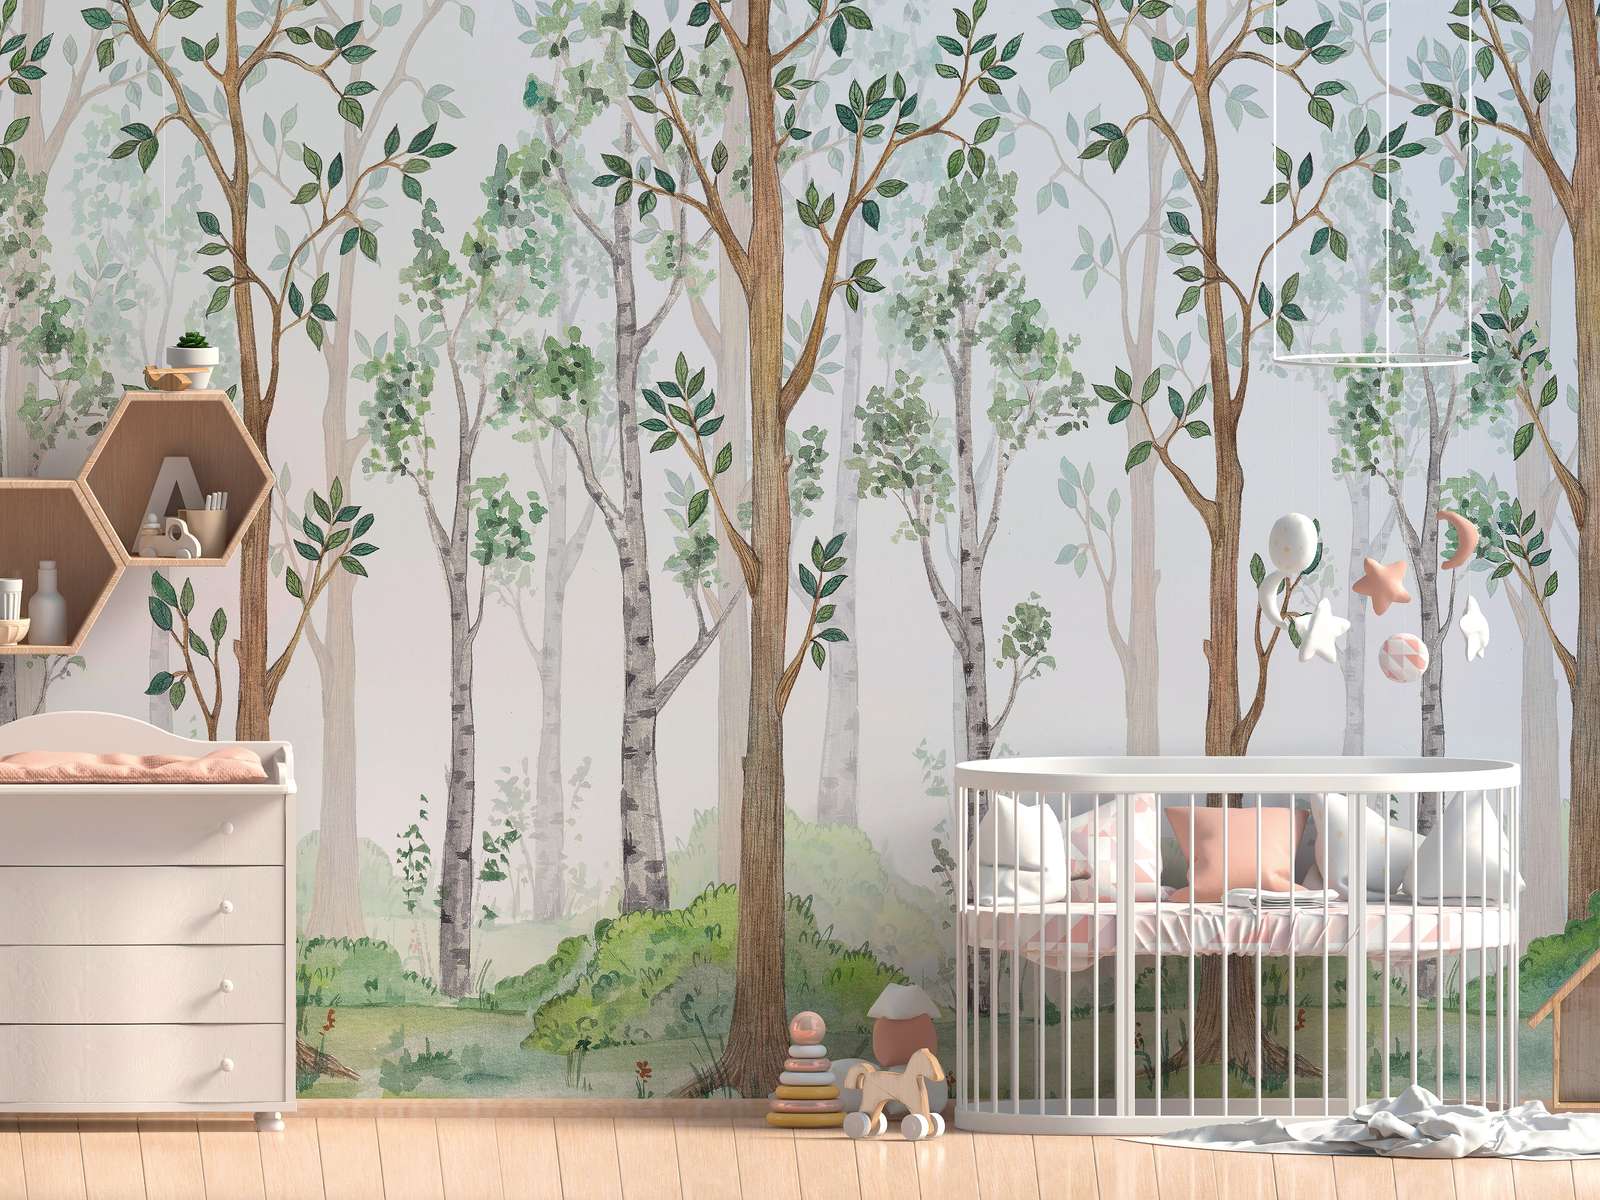             Painted Forest Wallpaper for Nursery - Green, Brown, White
        